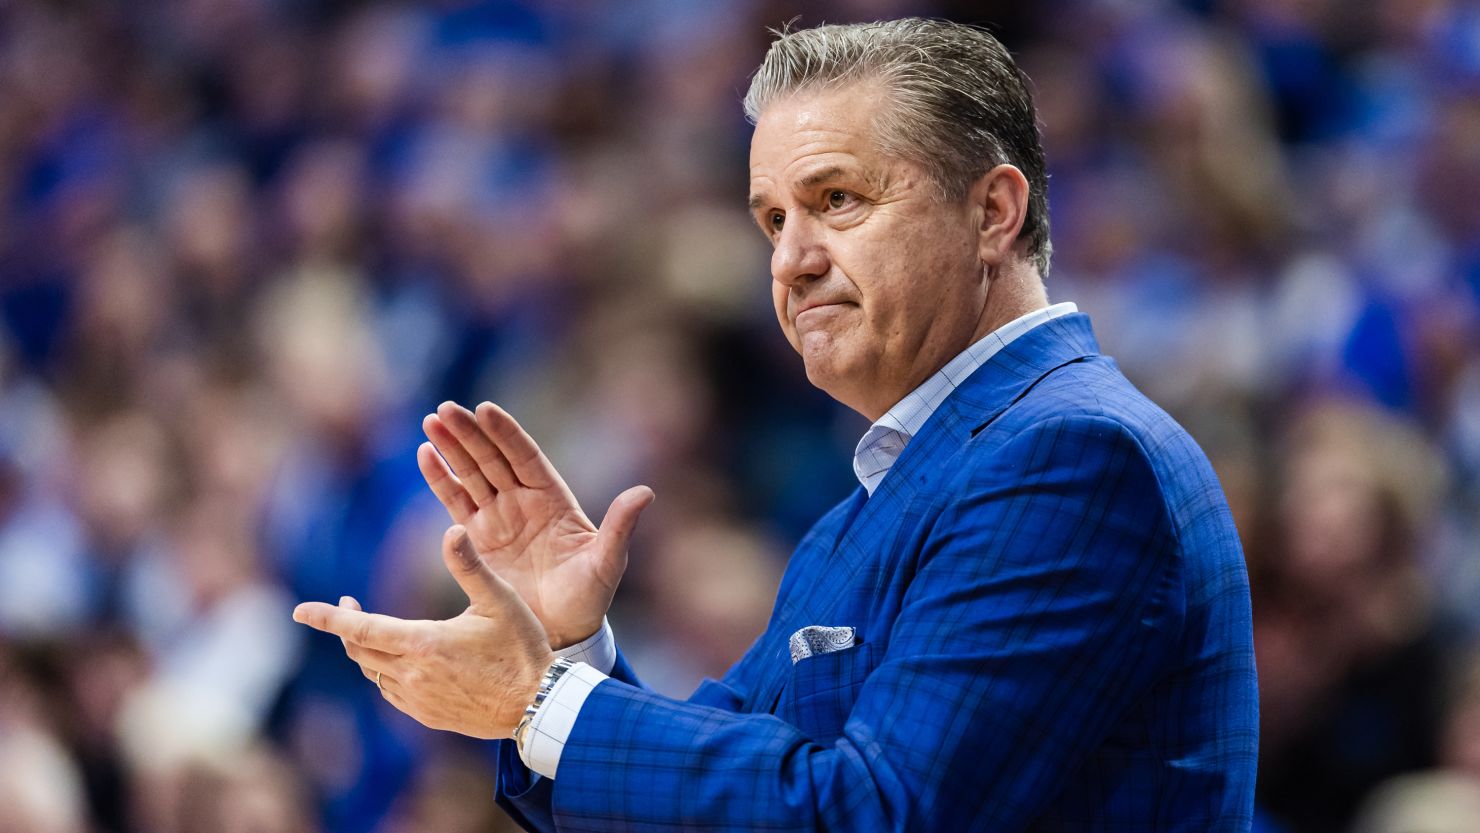 John Calipari joined the Kentucky Wildcats in 2009 and led the team to one national title 12 years ago.